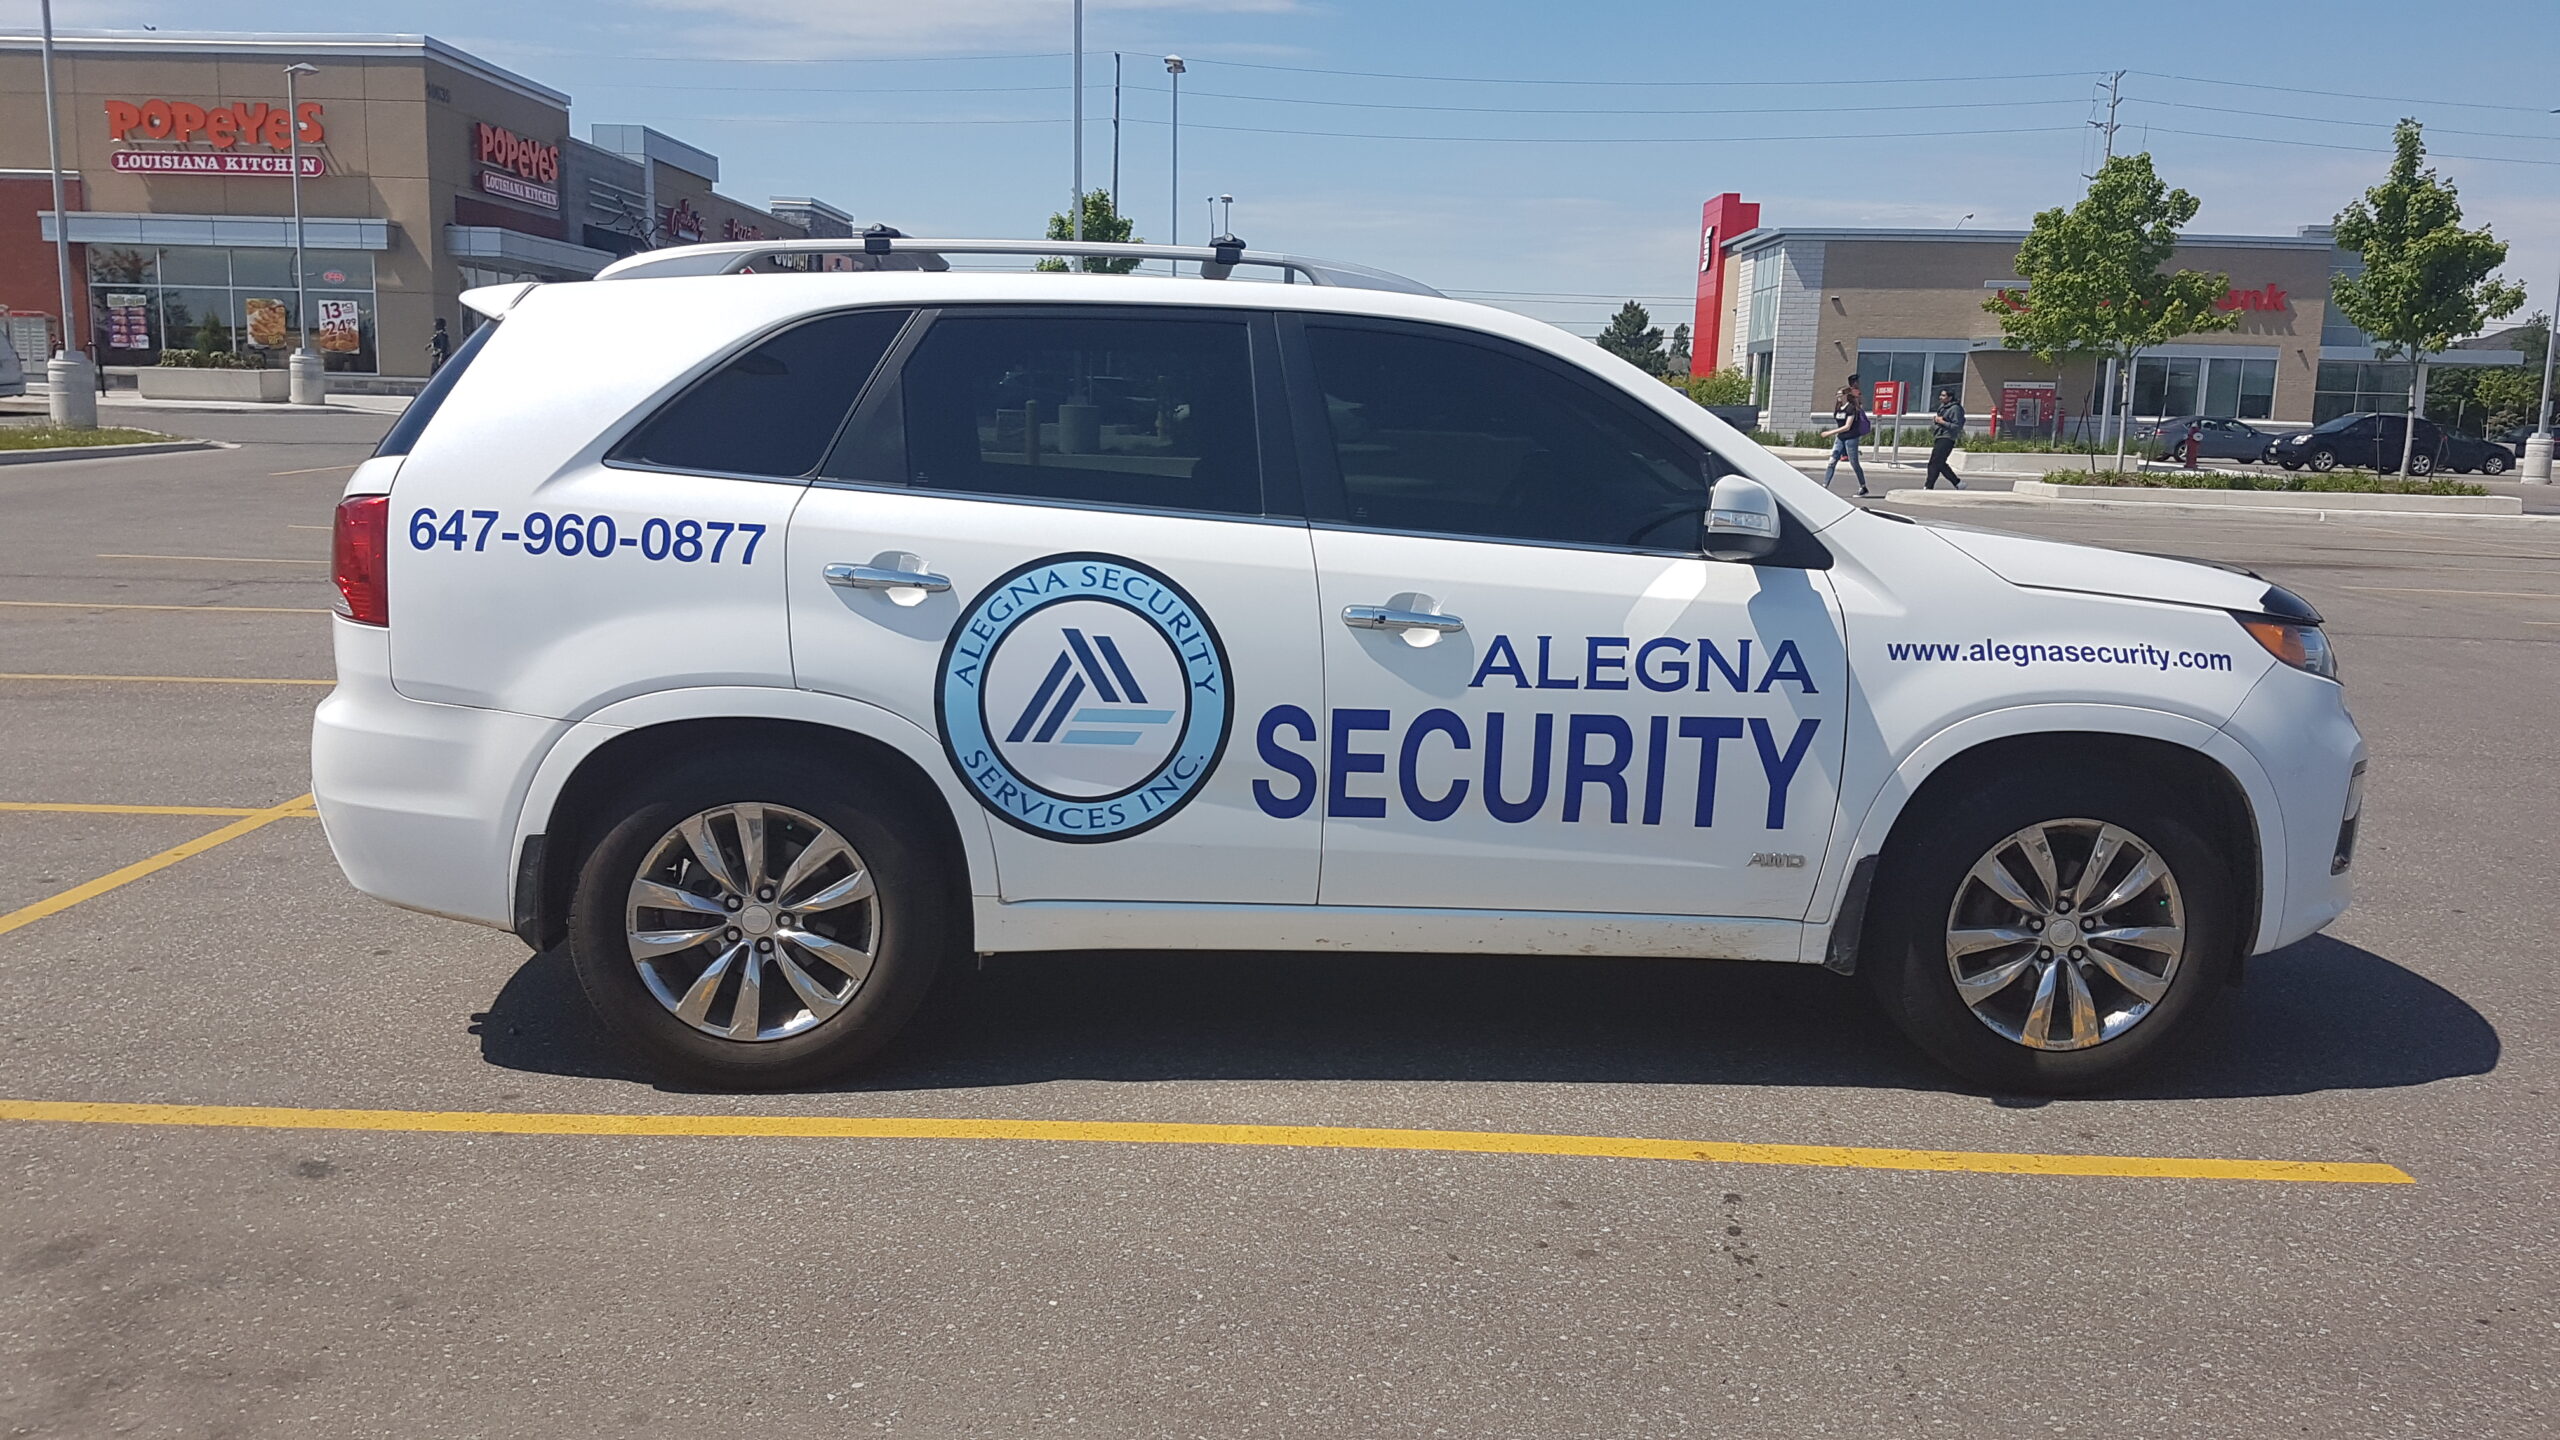 Security Services In Brampton